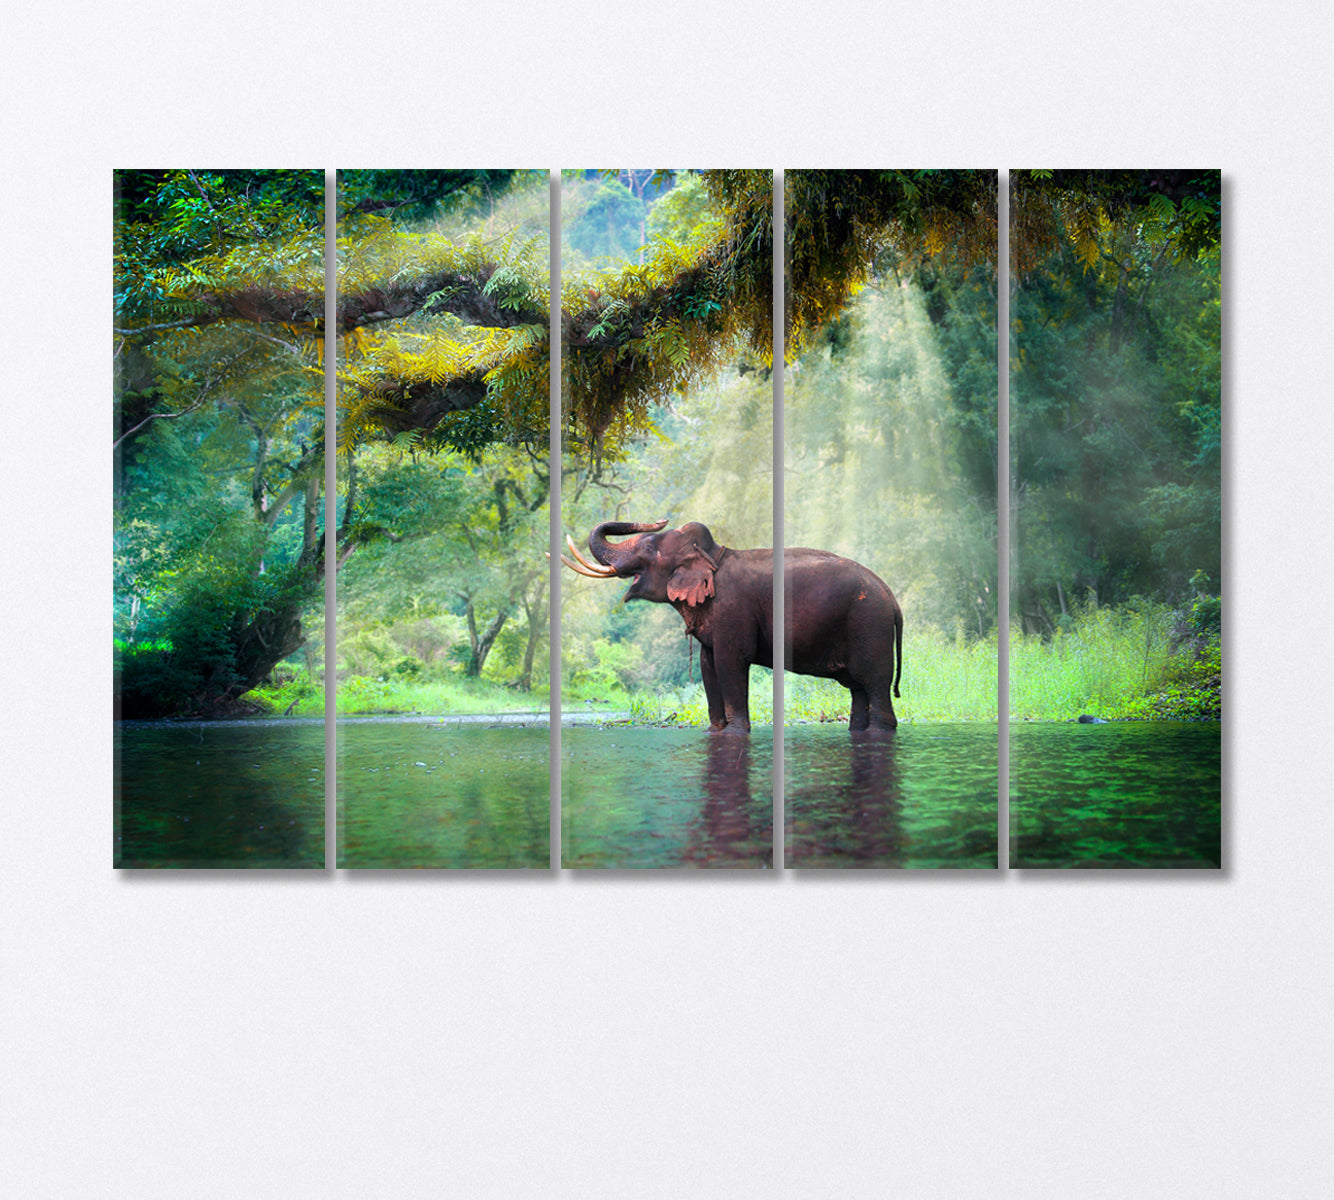 Wild Elephant in the Fairy Forest Thailand Canvas Print-Canvas Print-CetArt-5 Panels-36x24 inches-CetArt